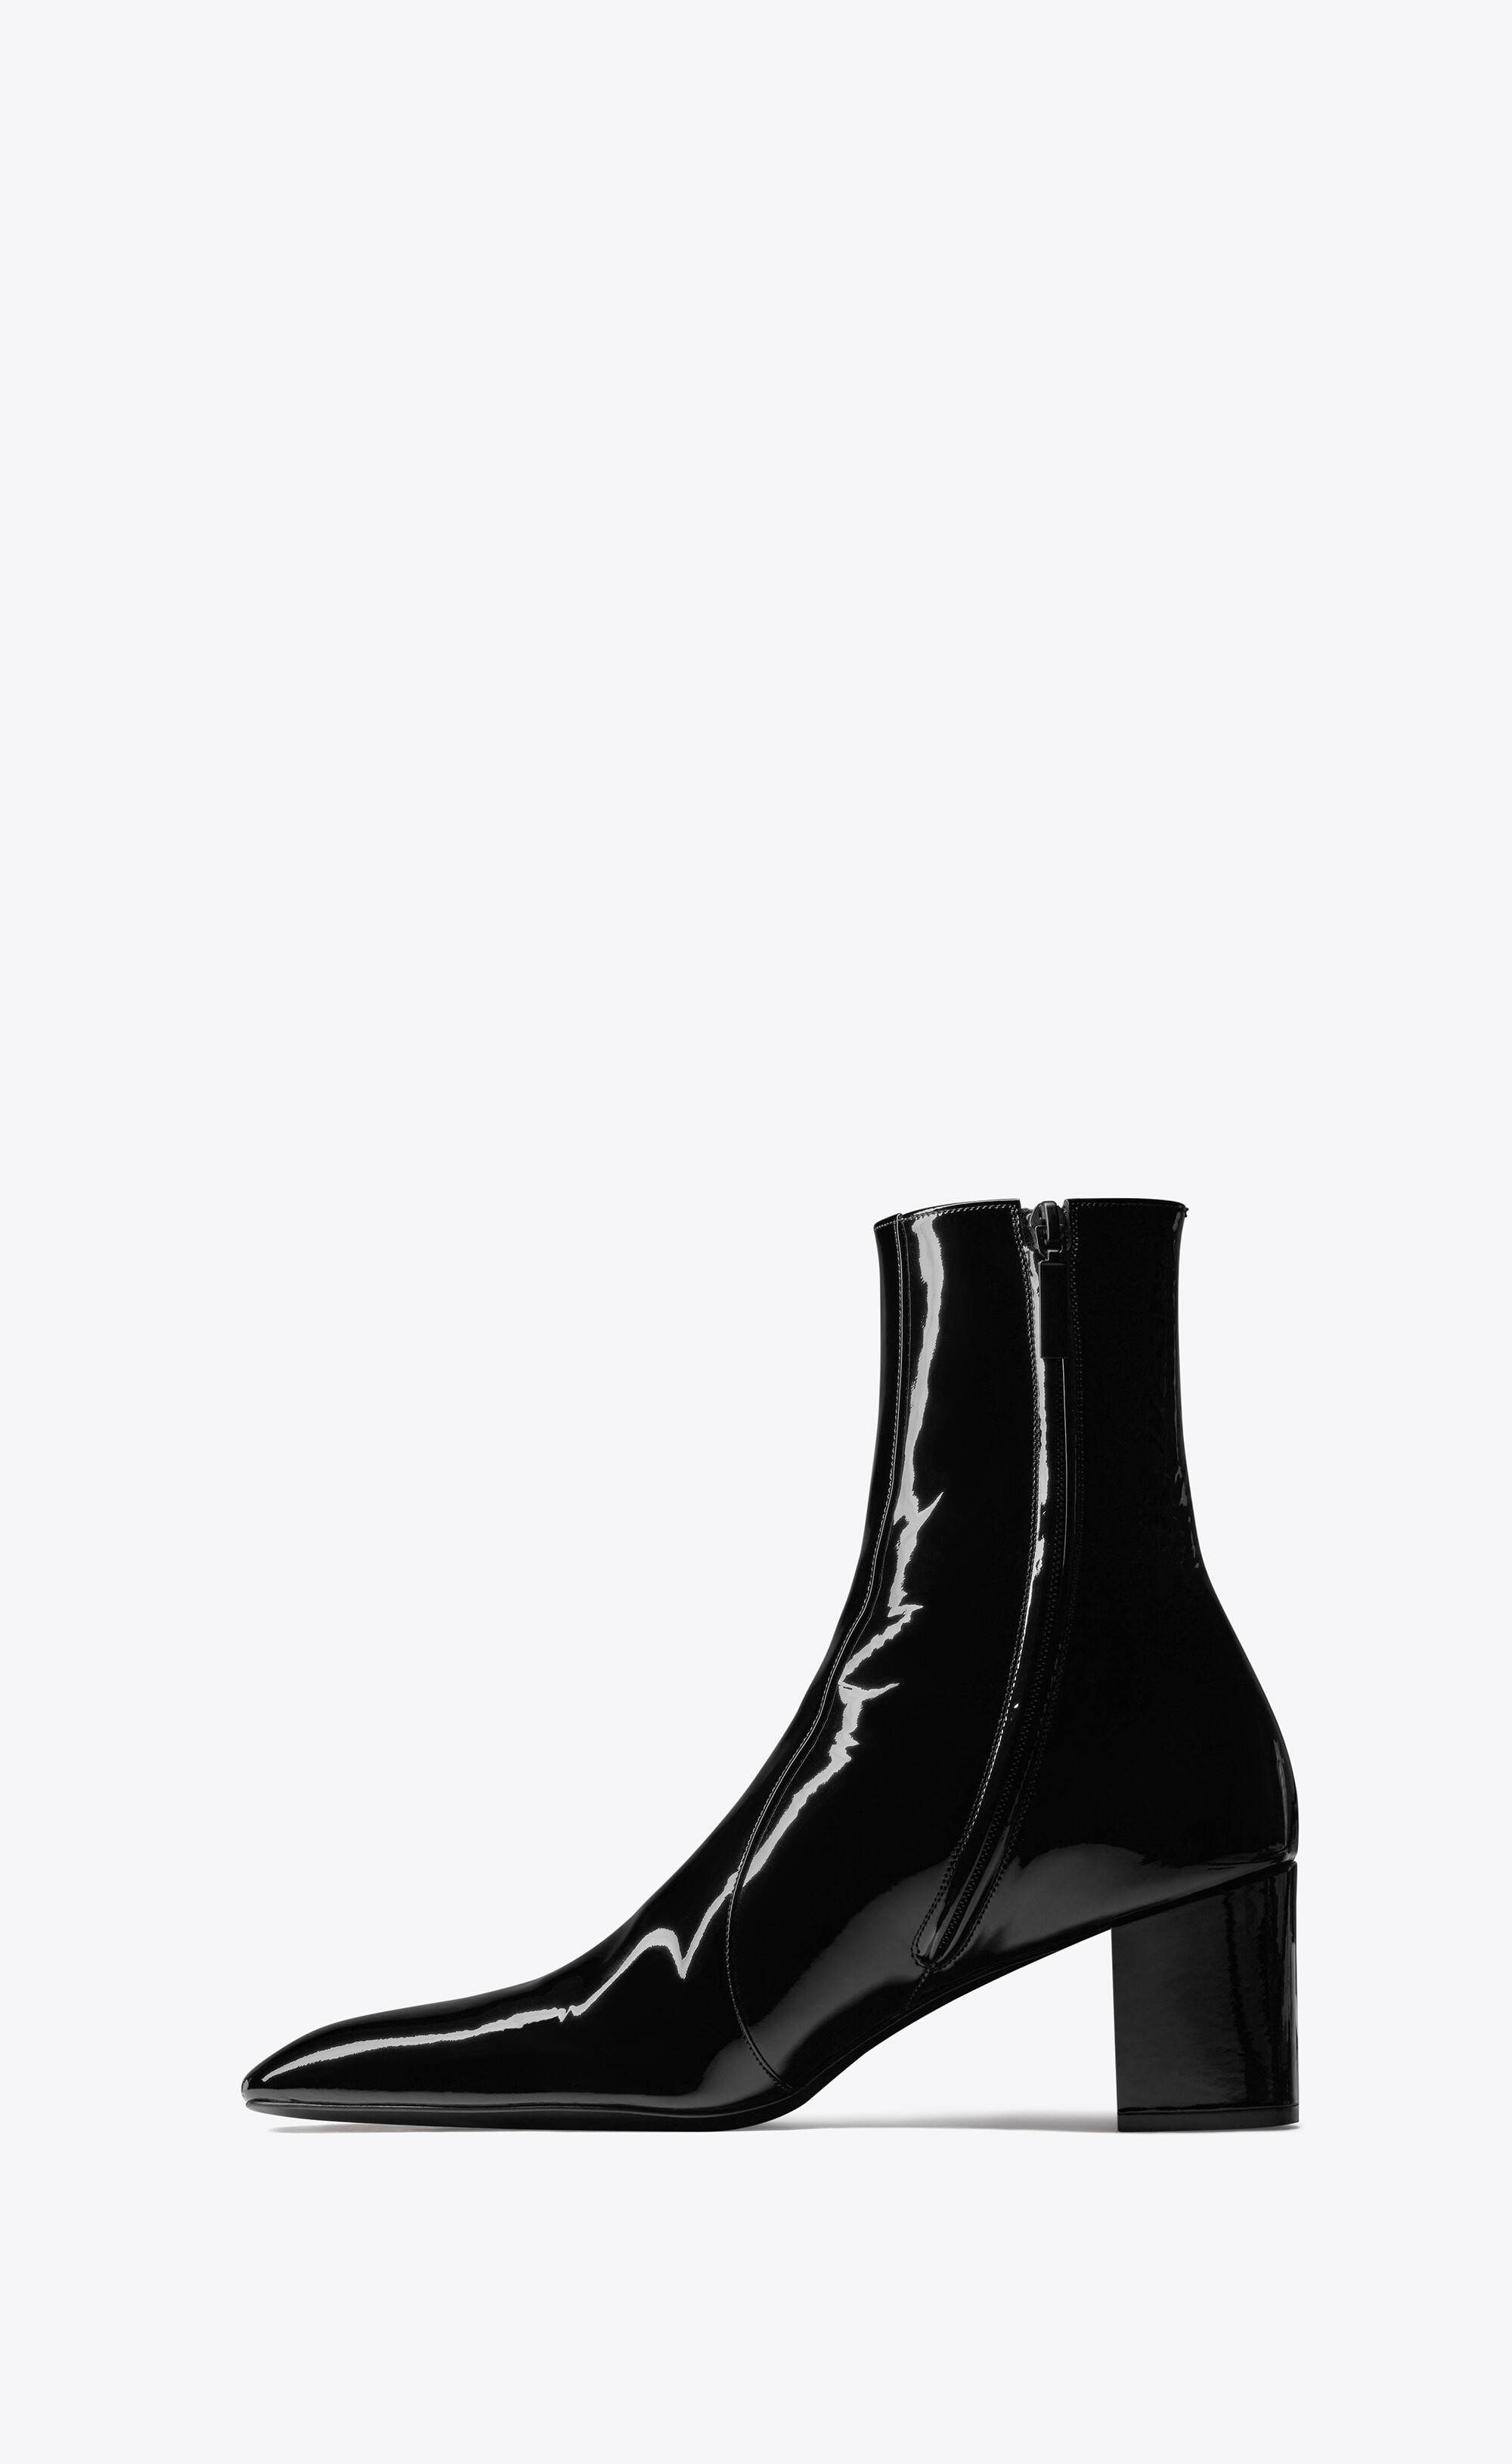 xiv zipped boots in patent leather - 3